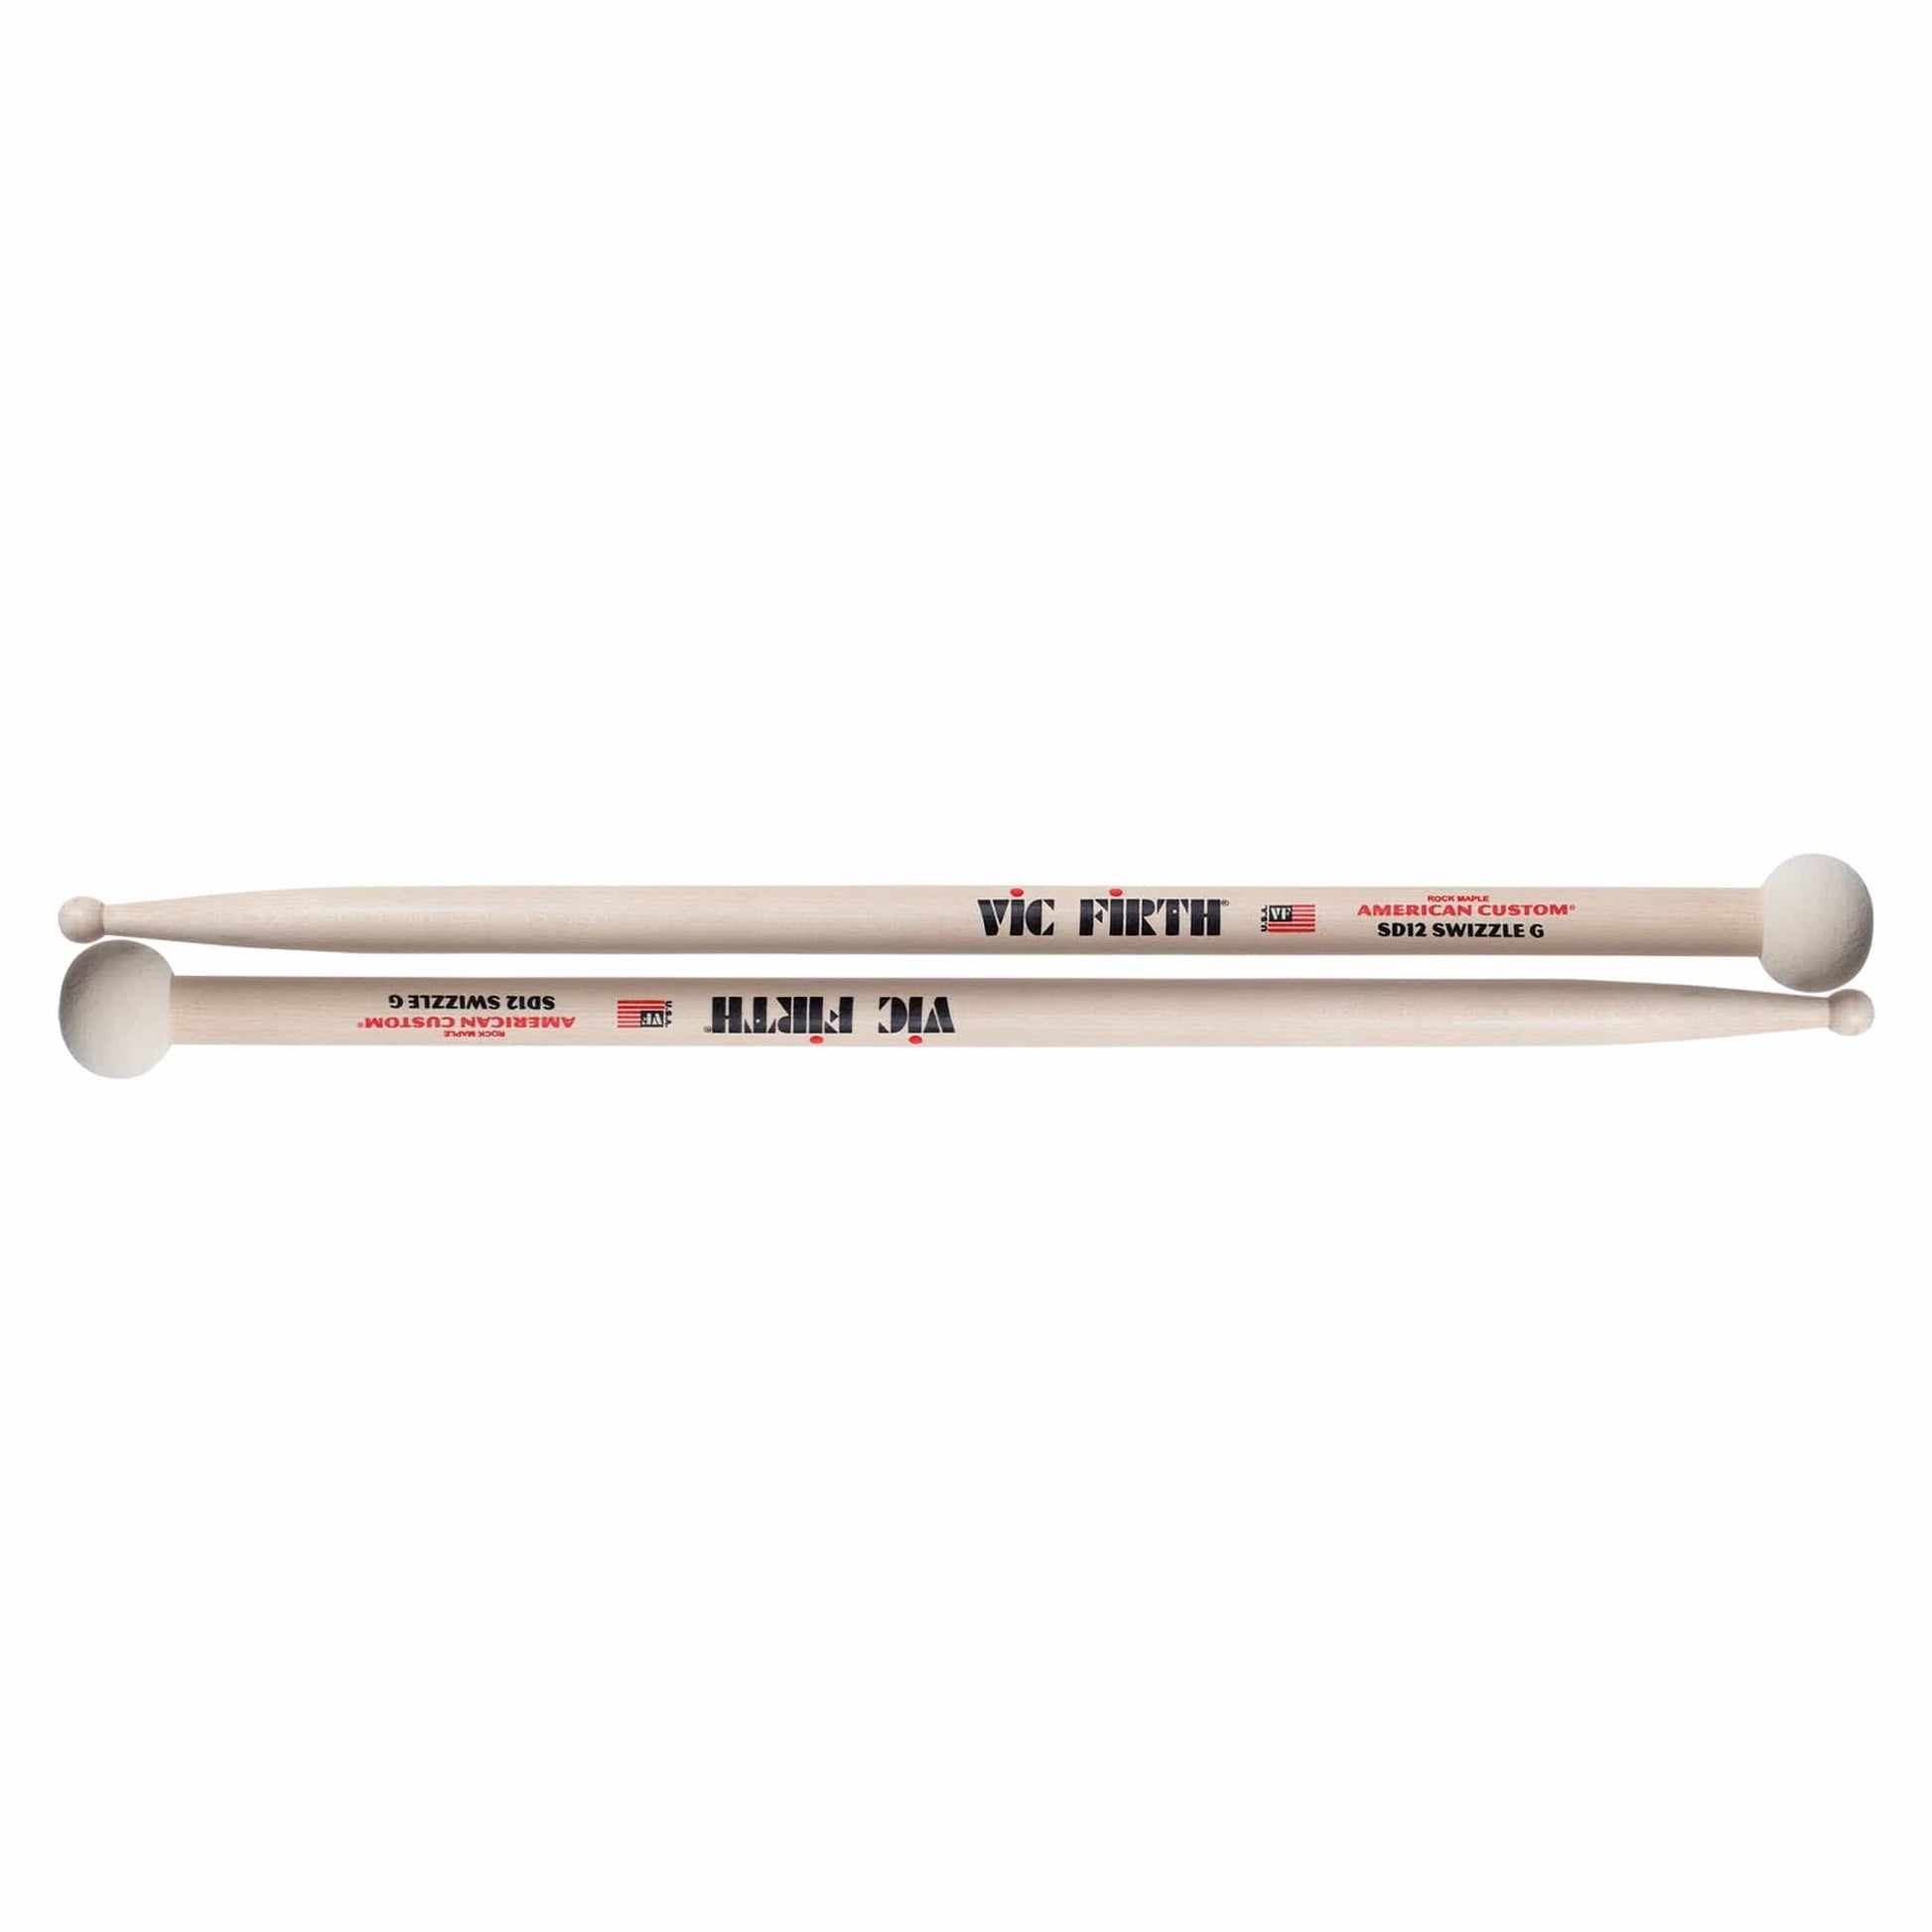 Vic Firth American Custom SD12 Swizzle G Drum Sticks Drums and Percussion / Parts and Accessories / Drum Sticks and Mallets